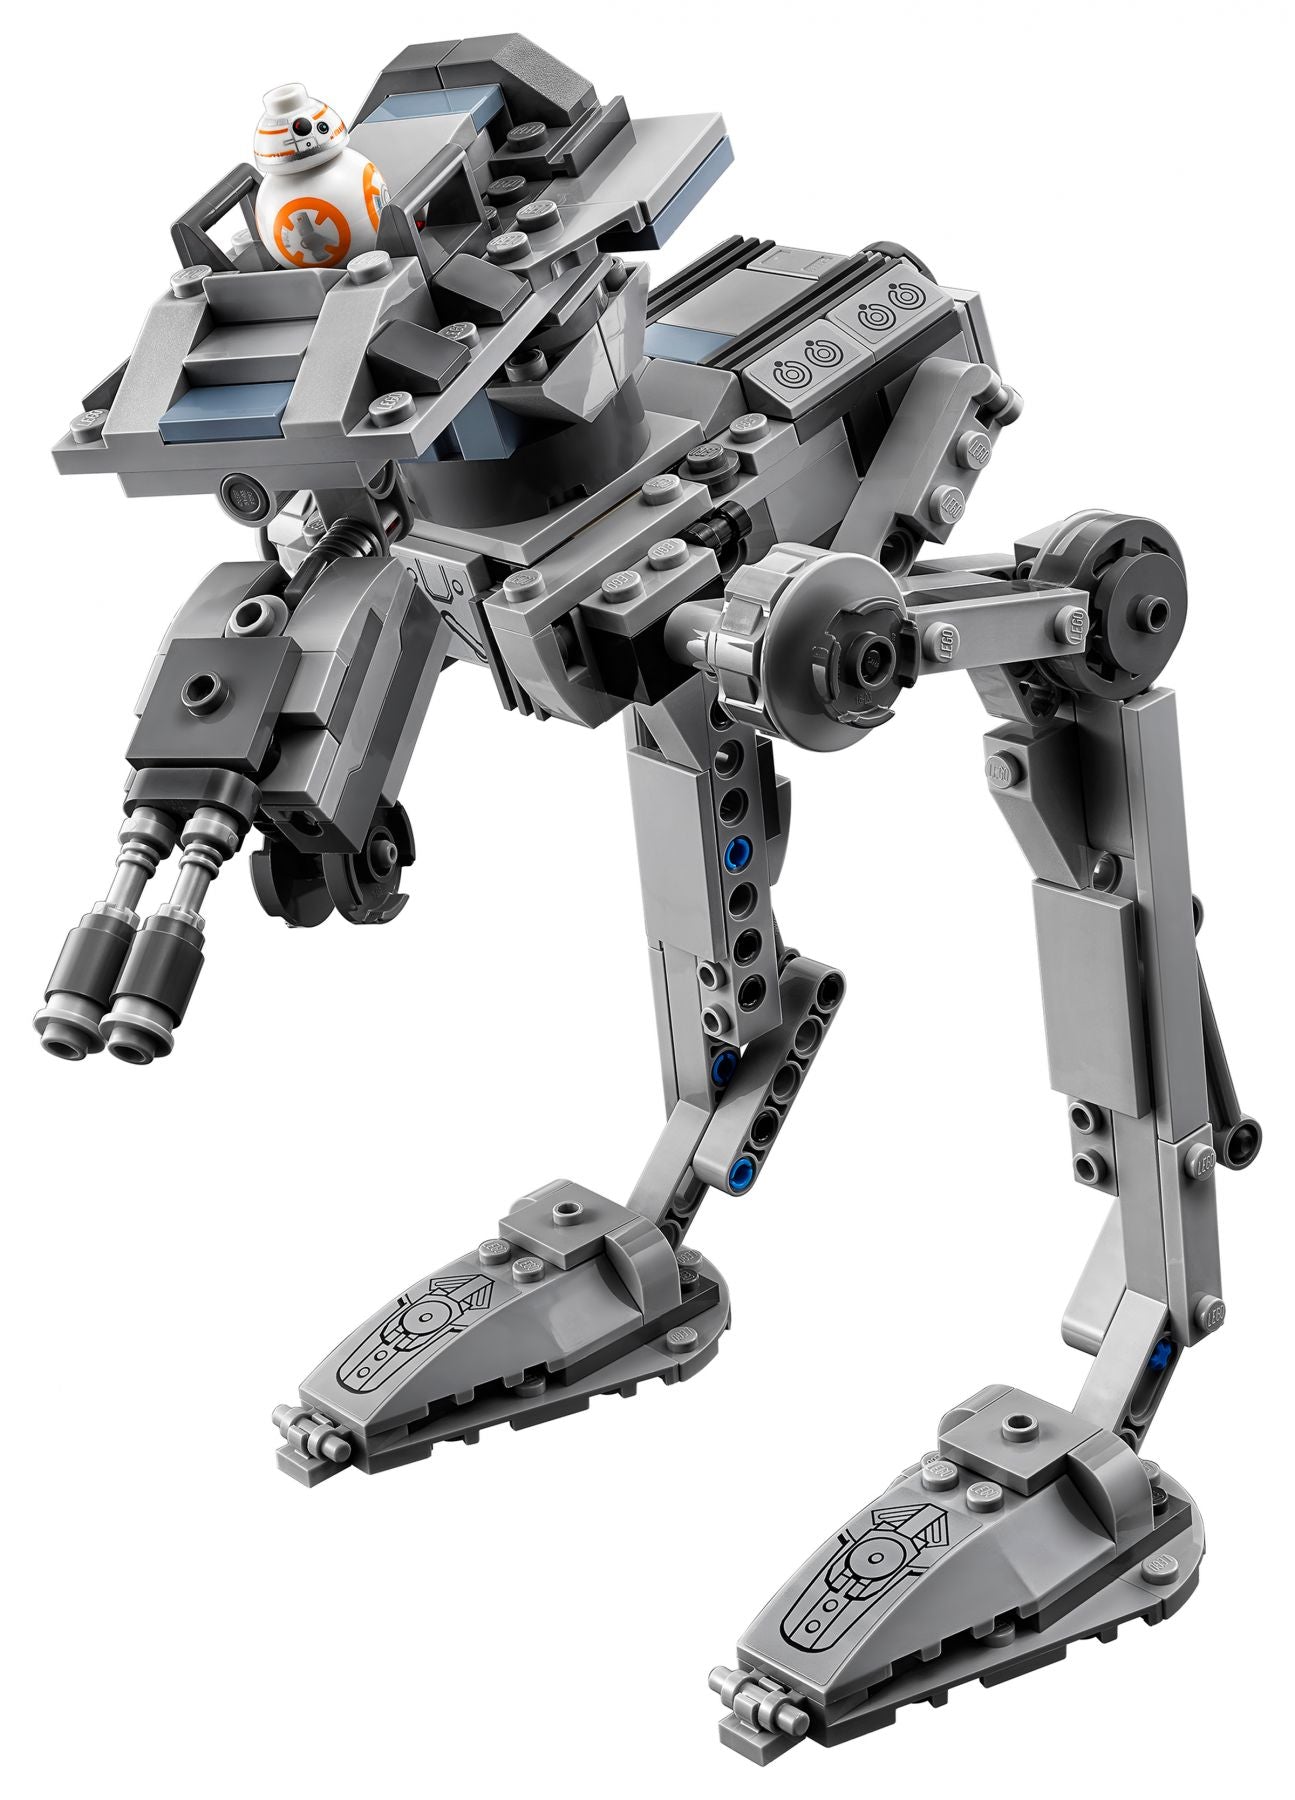 Star Wars 75201 First Order AT-ST